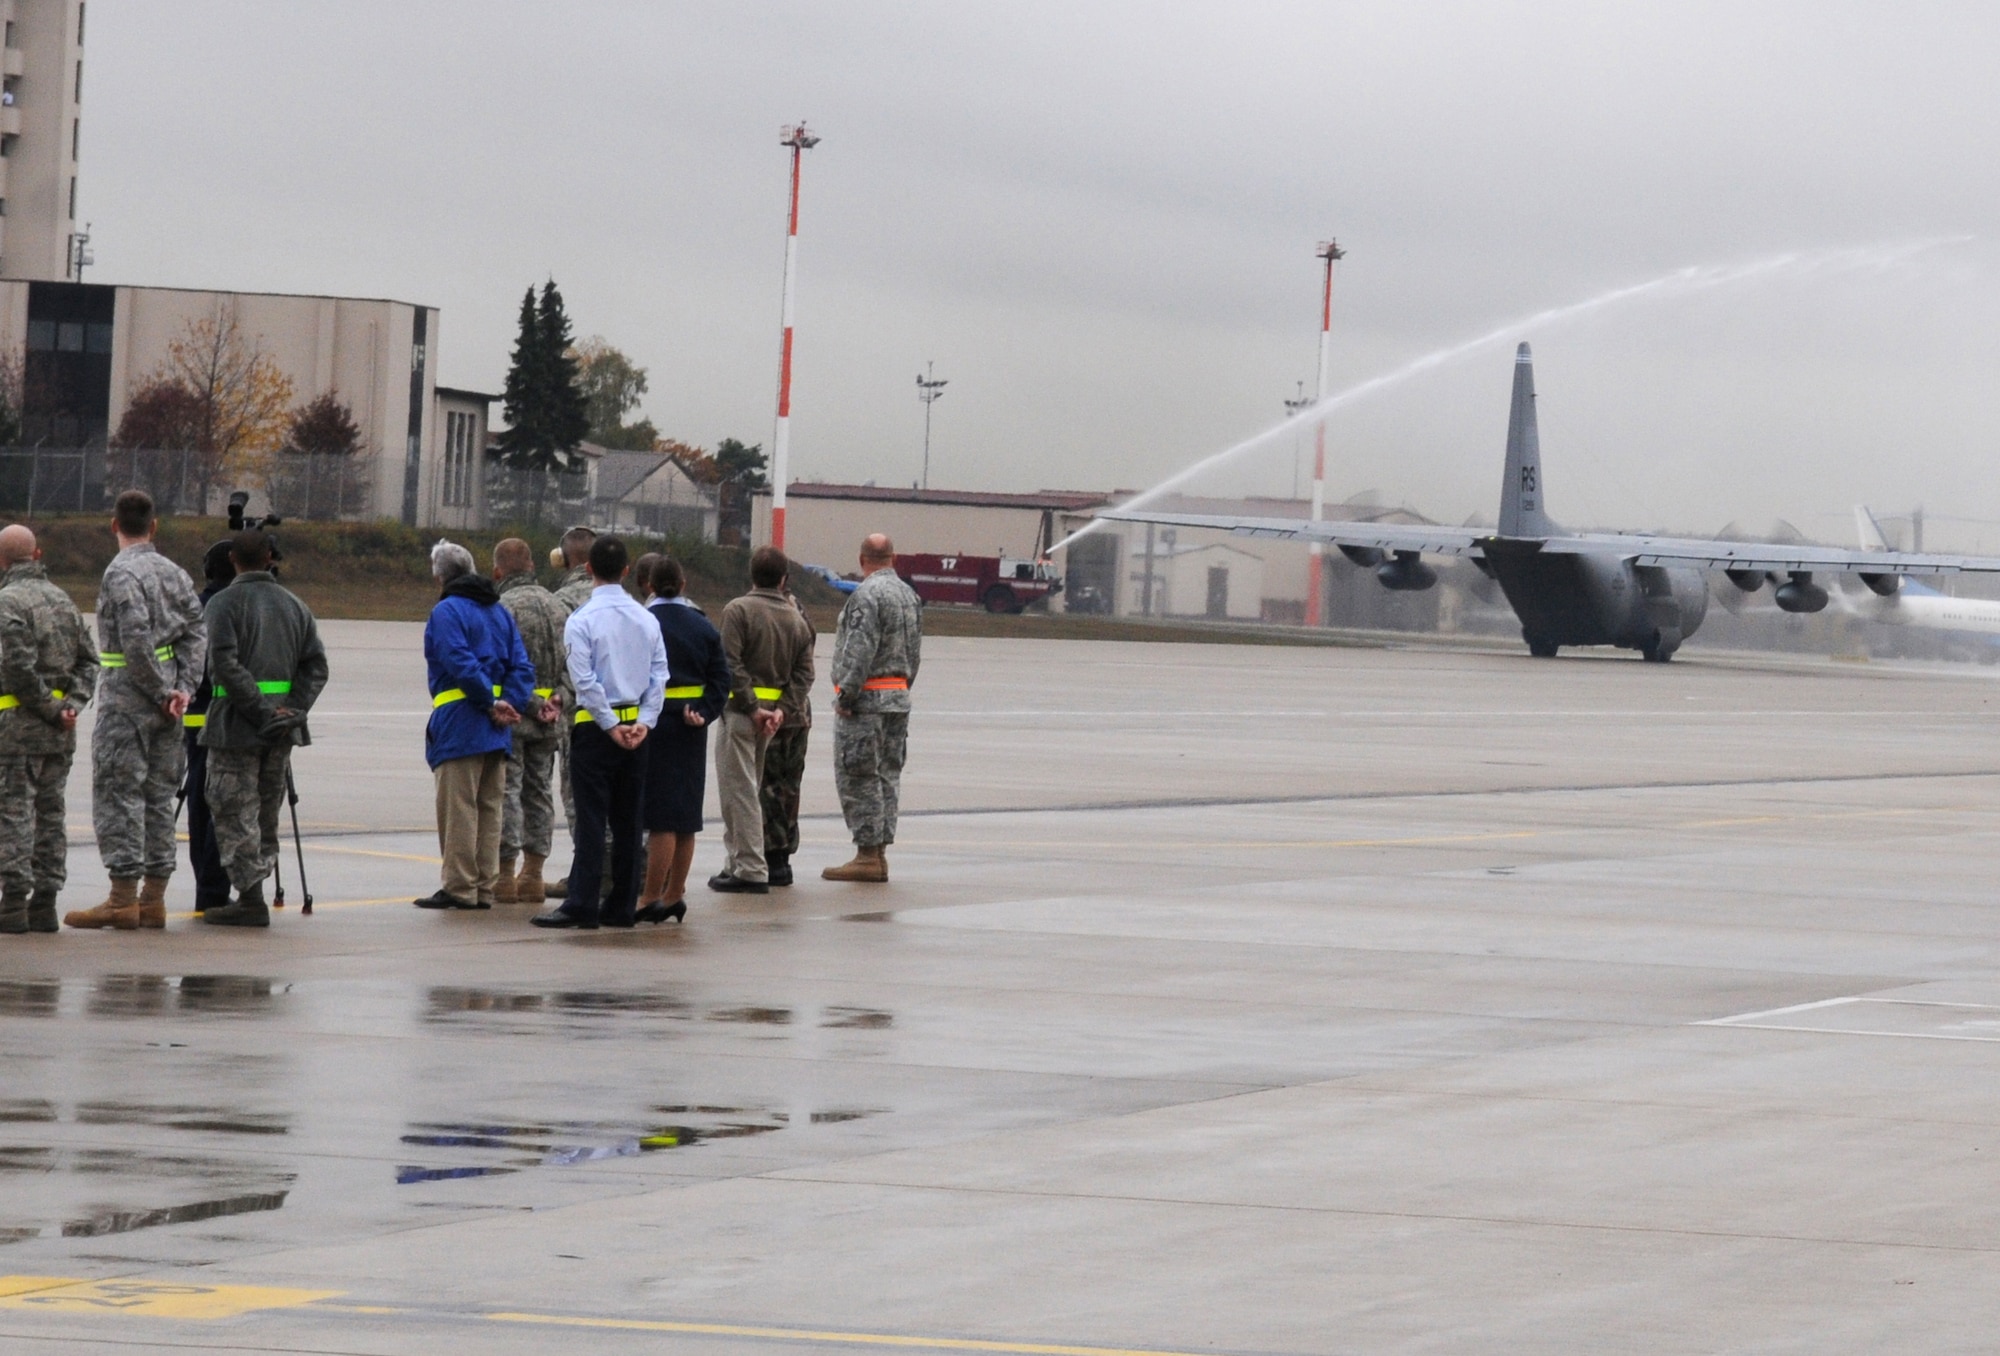 The 835th Civil Engineer Squadron fire department performs a water-gun salute as Ramstein's last C-130E Hercules taxies down the flight line for departure, Ramstein Air Base, Germany, Nov. 2, 2009.  The C-130E Hercules has provided more than 40 years of airpower to U.S.  Air Forces in Europe, and is being replaced with the new C-130J Super Hercules as part of the revitalization of the Air Force fleet. (U.S. Air Force photo by Airman 1st Class Caleb Pierce)